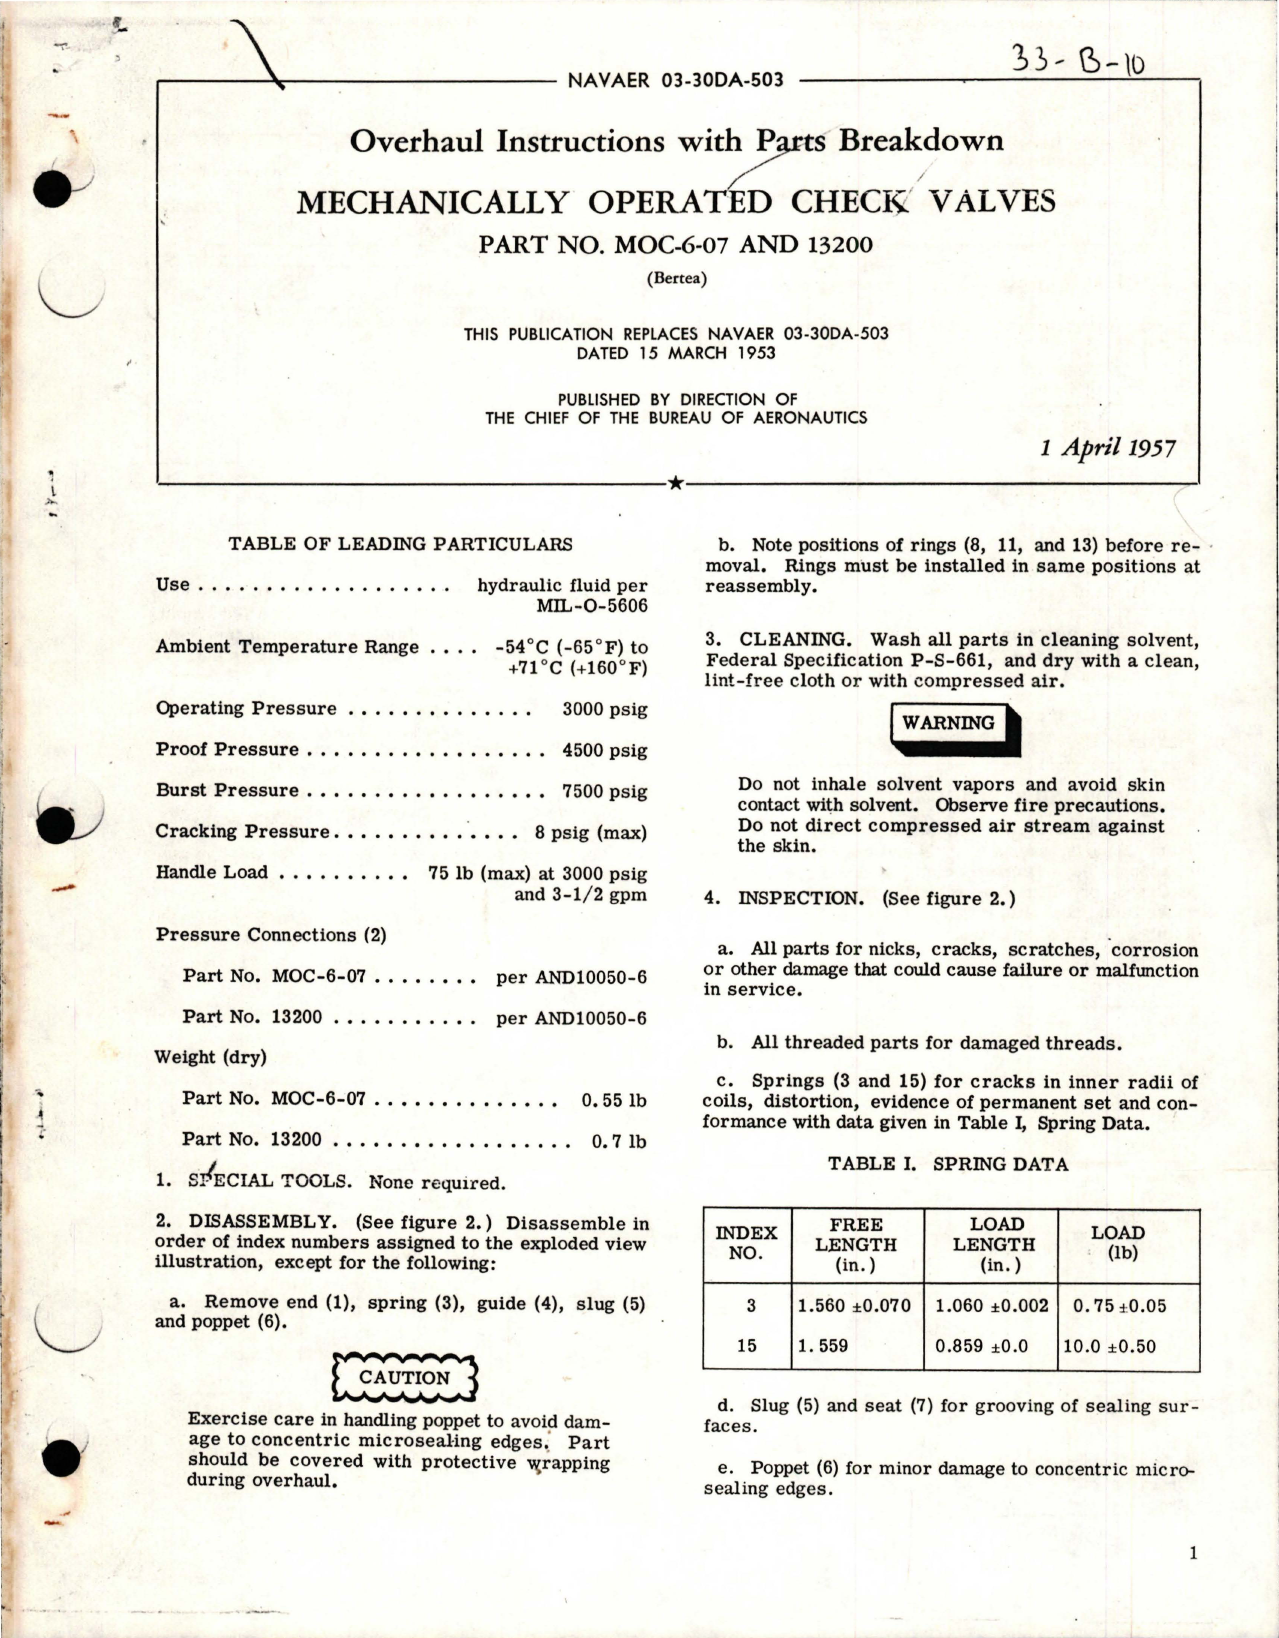 Sample page 1 from AirCorps Library document: Overhaul Instructions with Parts Breakdown for Mechanically Operated Check Valves - Parts MOC-6-67 and 13200